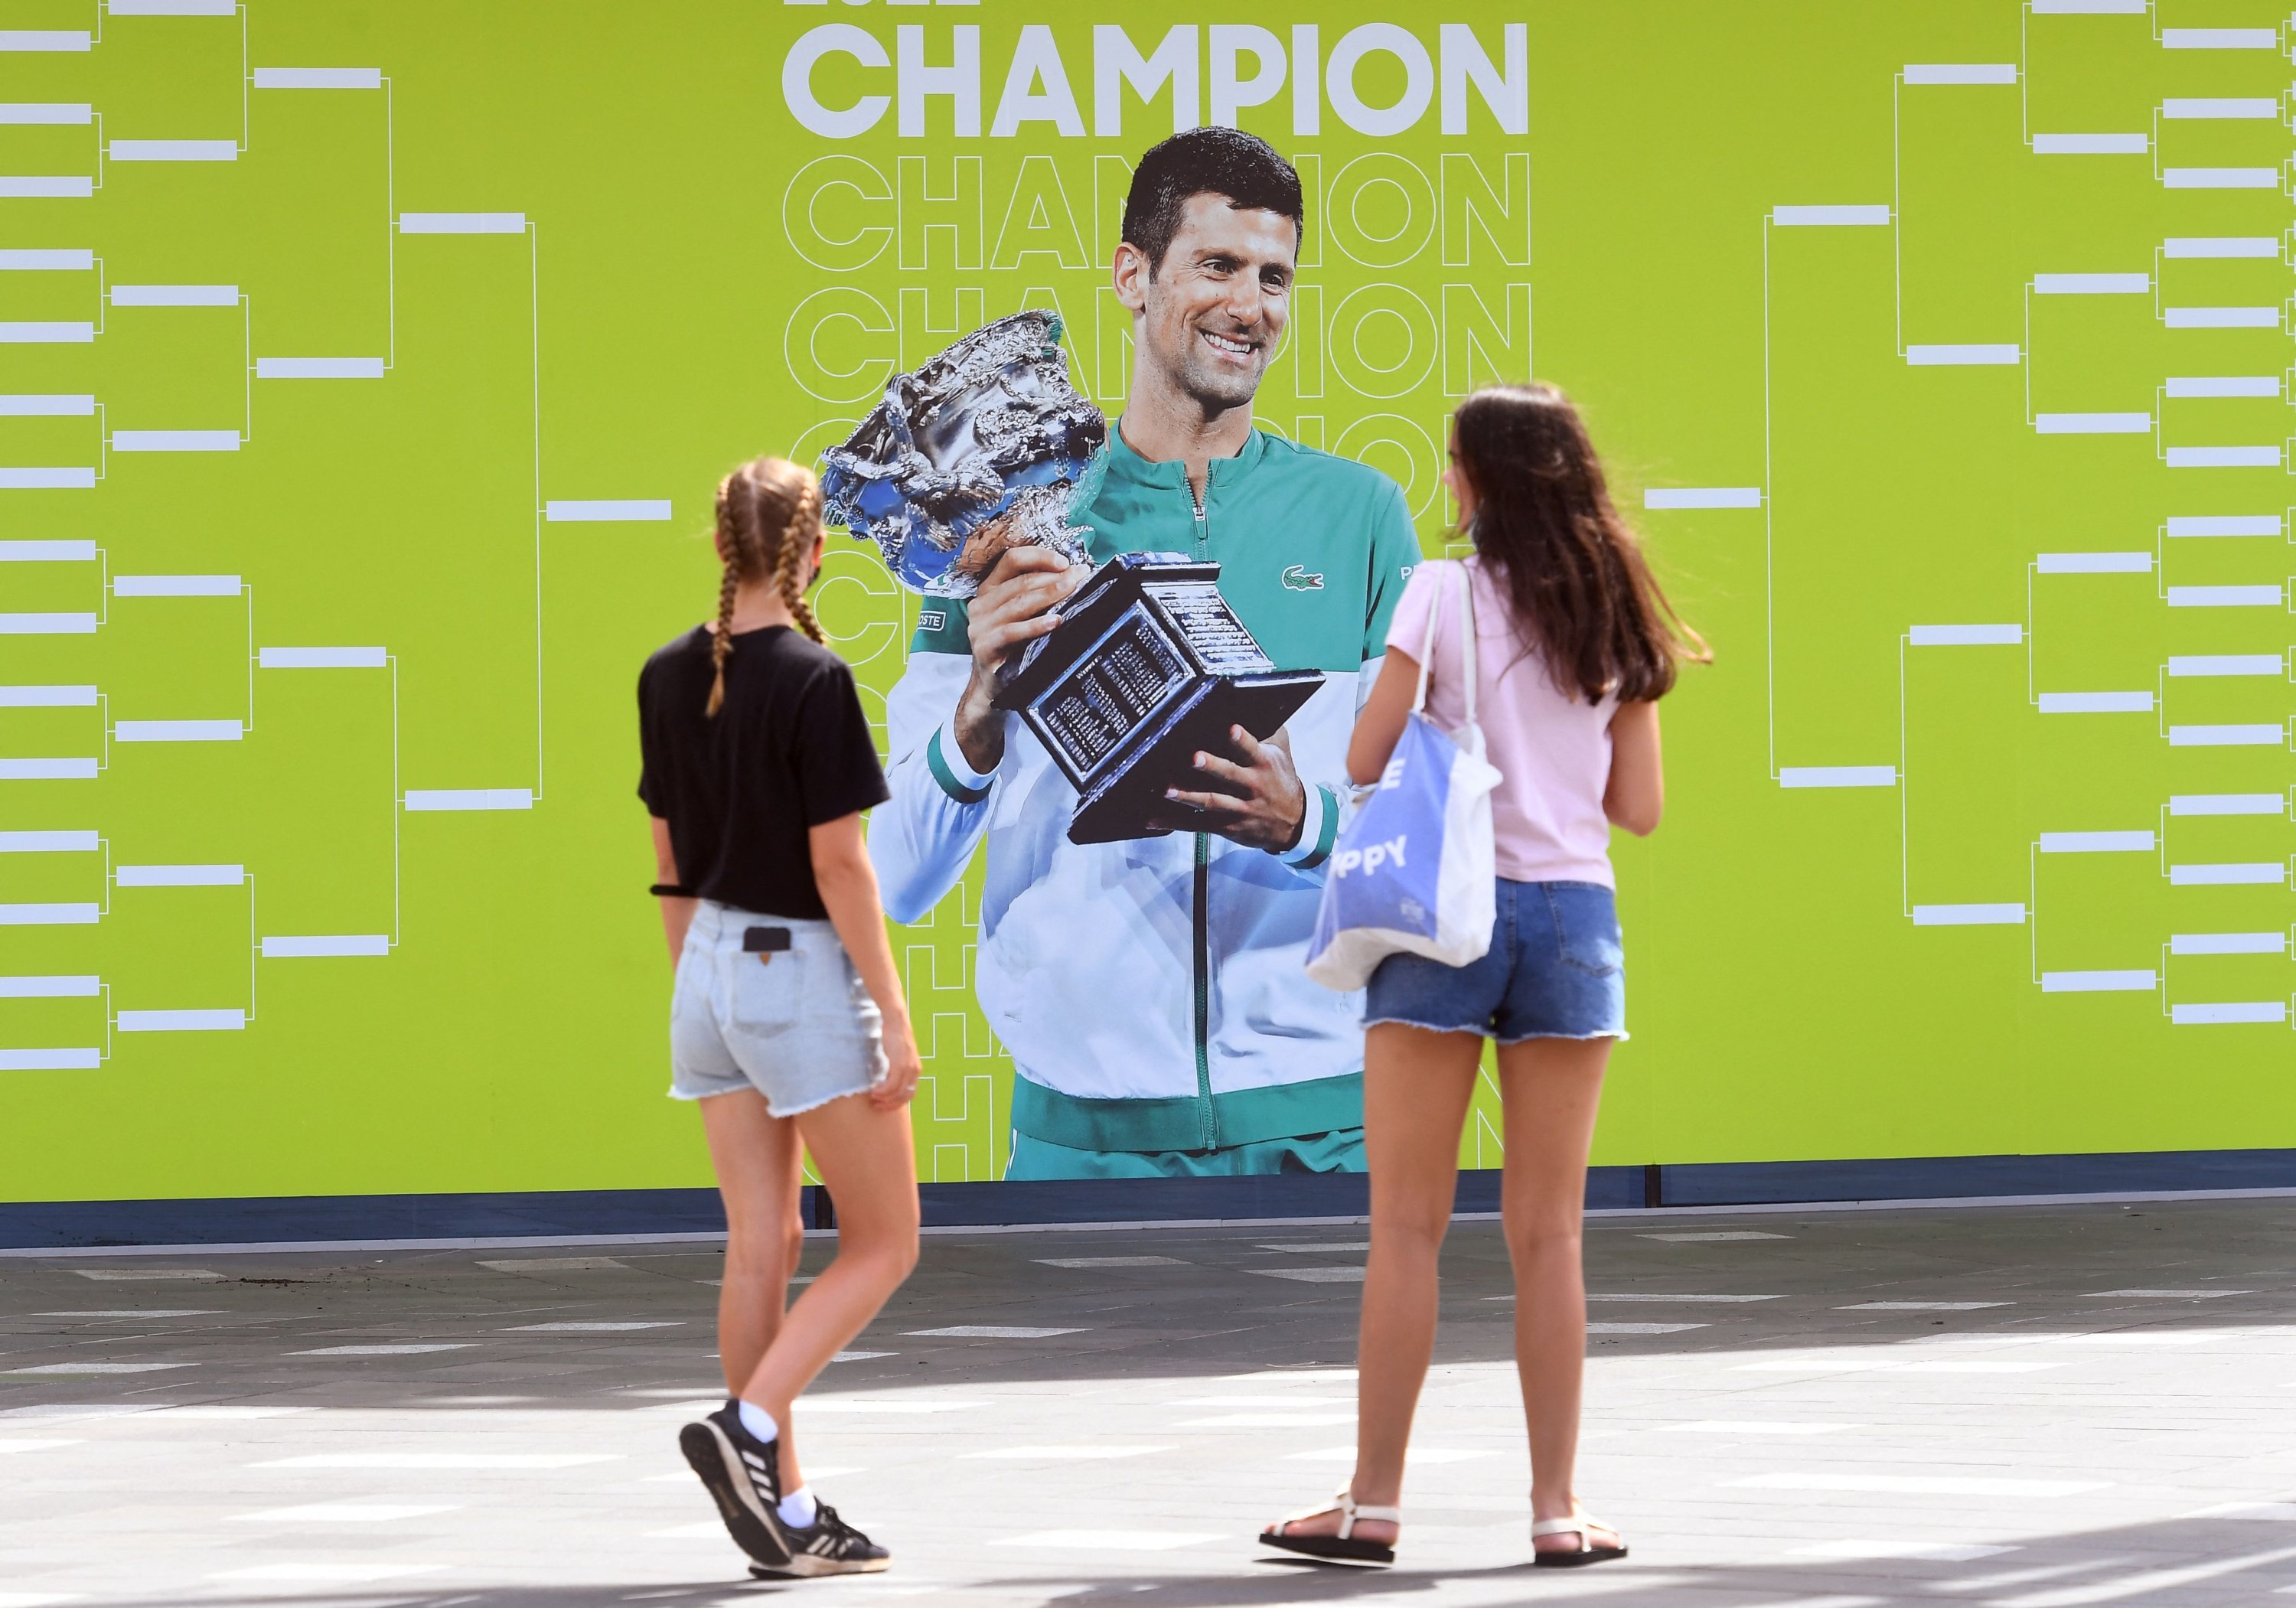 Galaxy madlavning Mobilisere Australian Open confirms Djokovic, Barty as No. 1 seeds | Daily Sabah